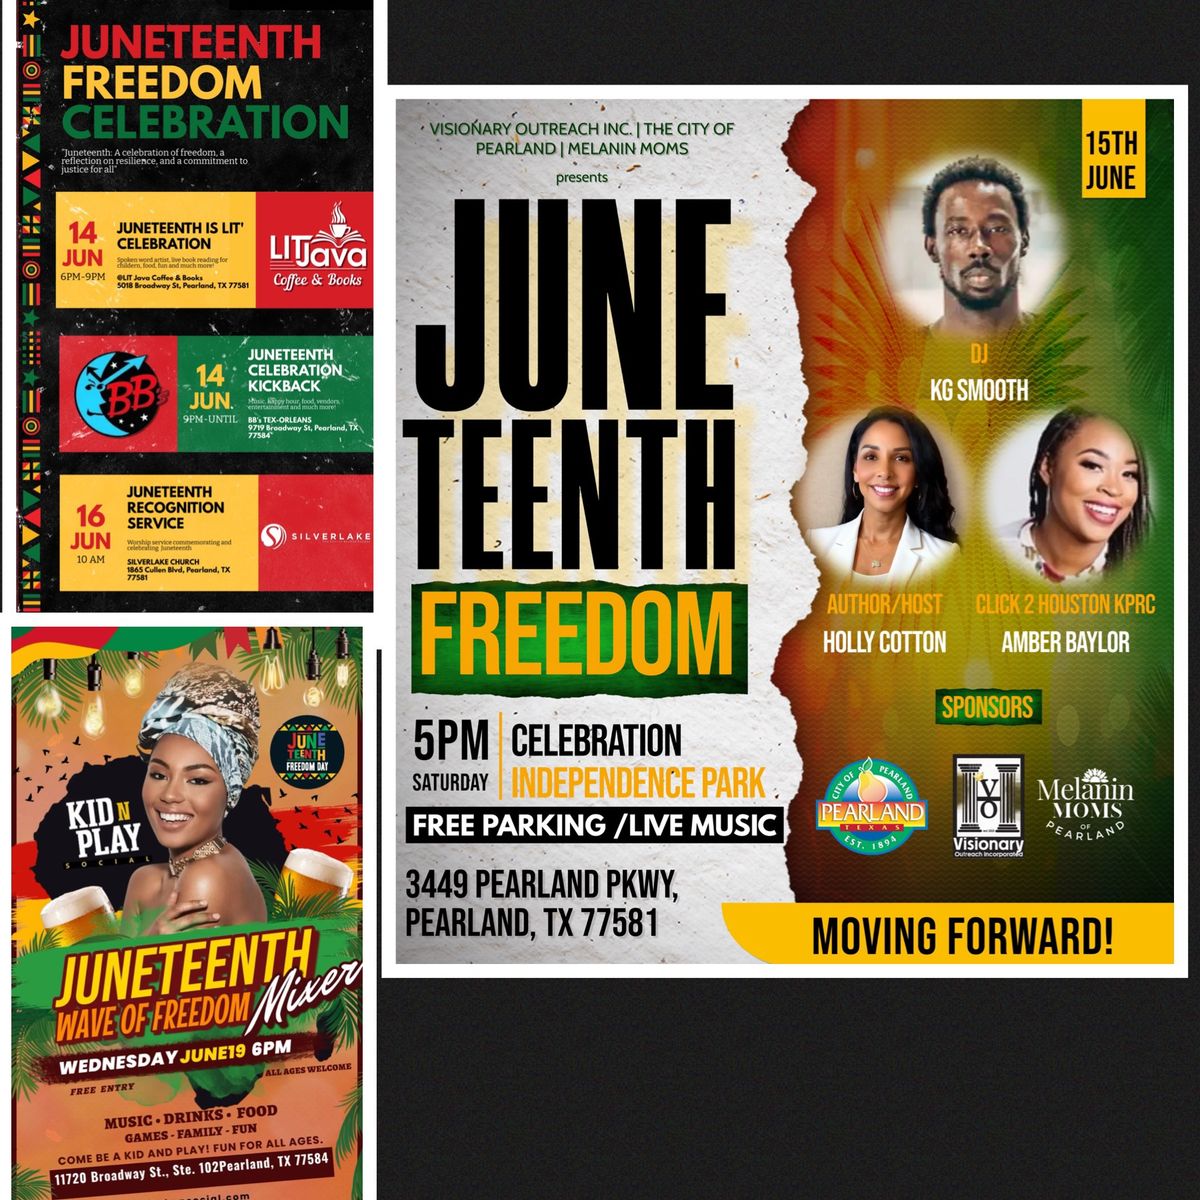 The Juneteenth Experience Pearland 